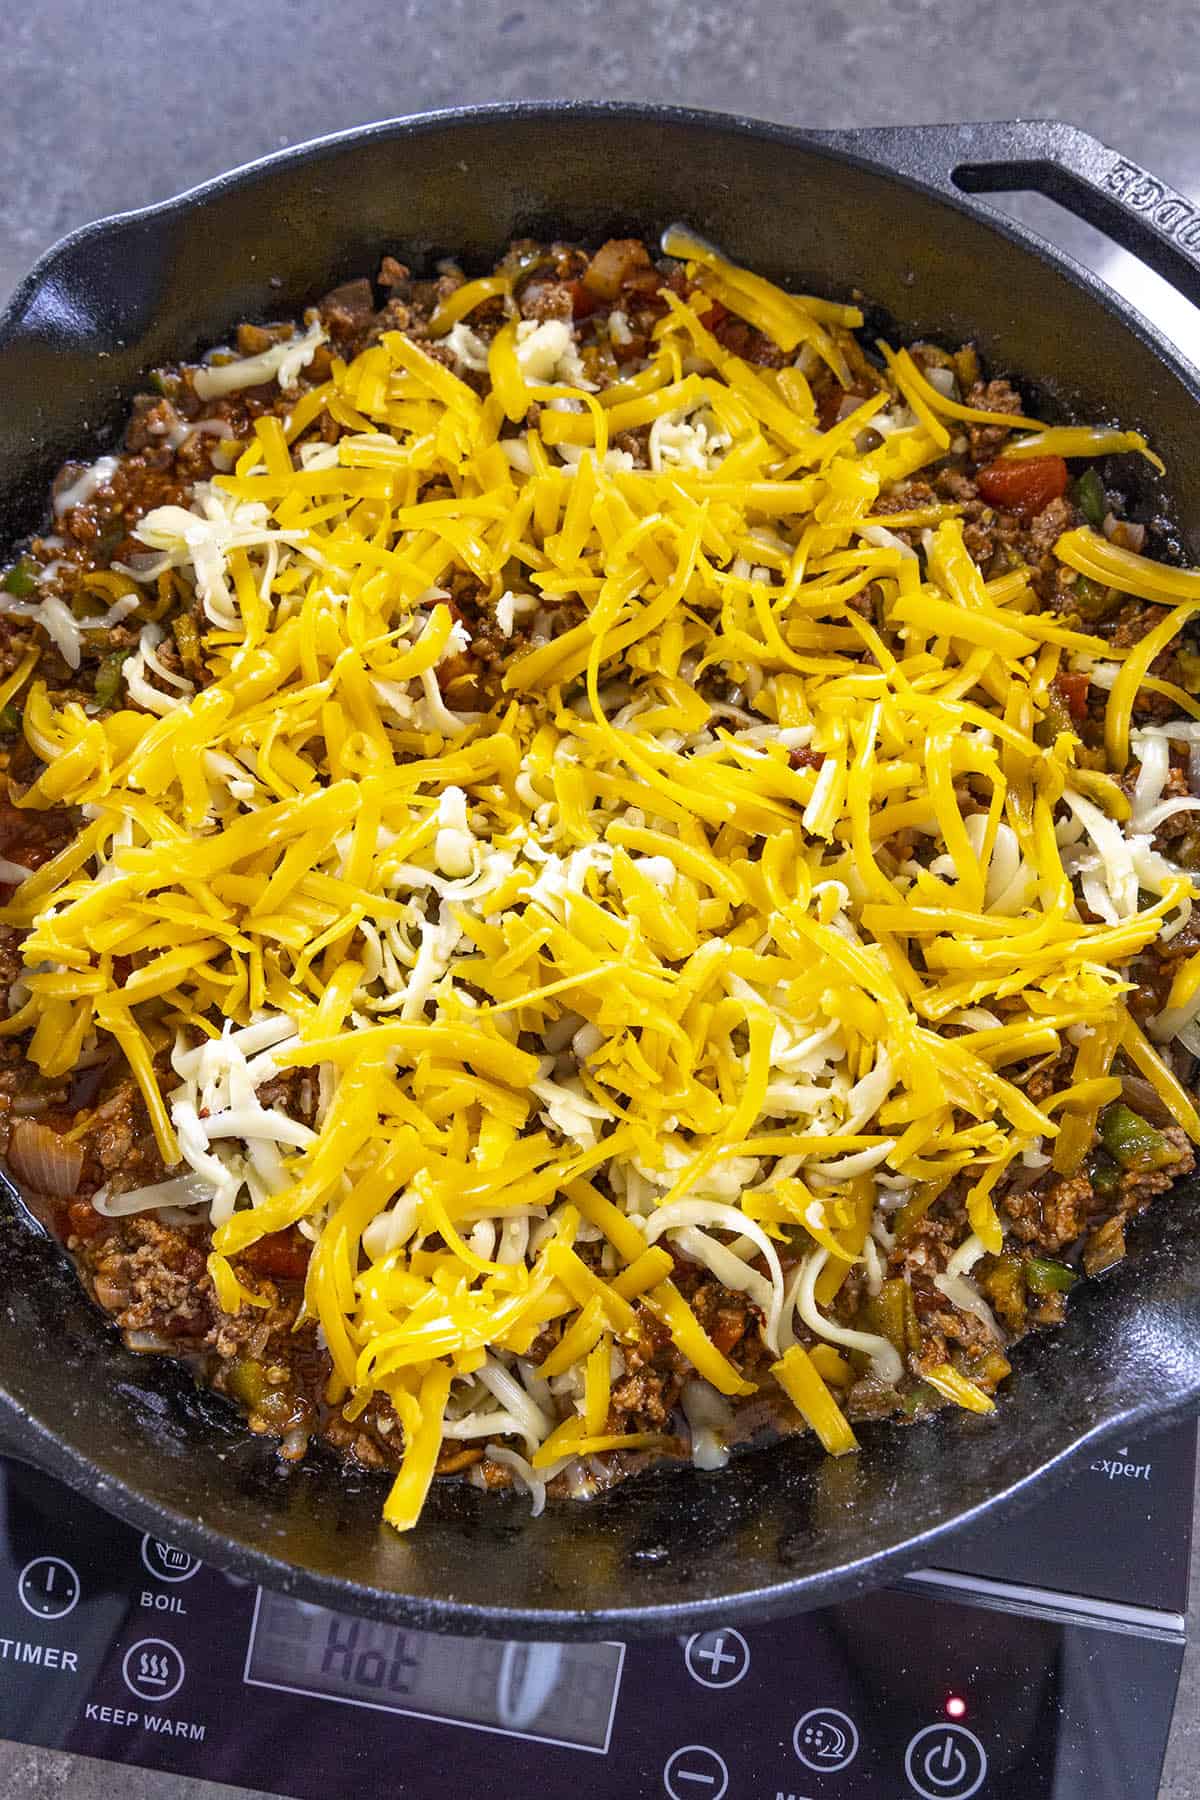 Topping the Chili Cheese Dip with cheese